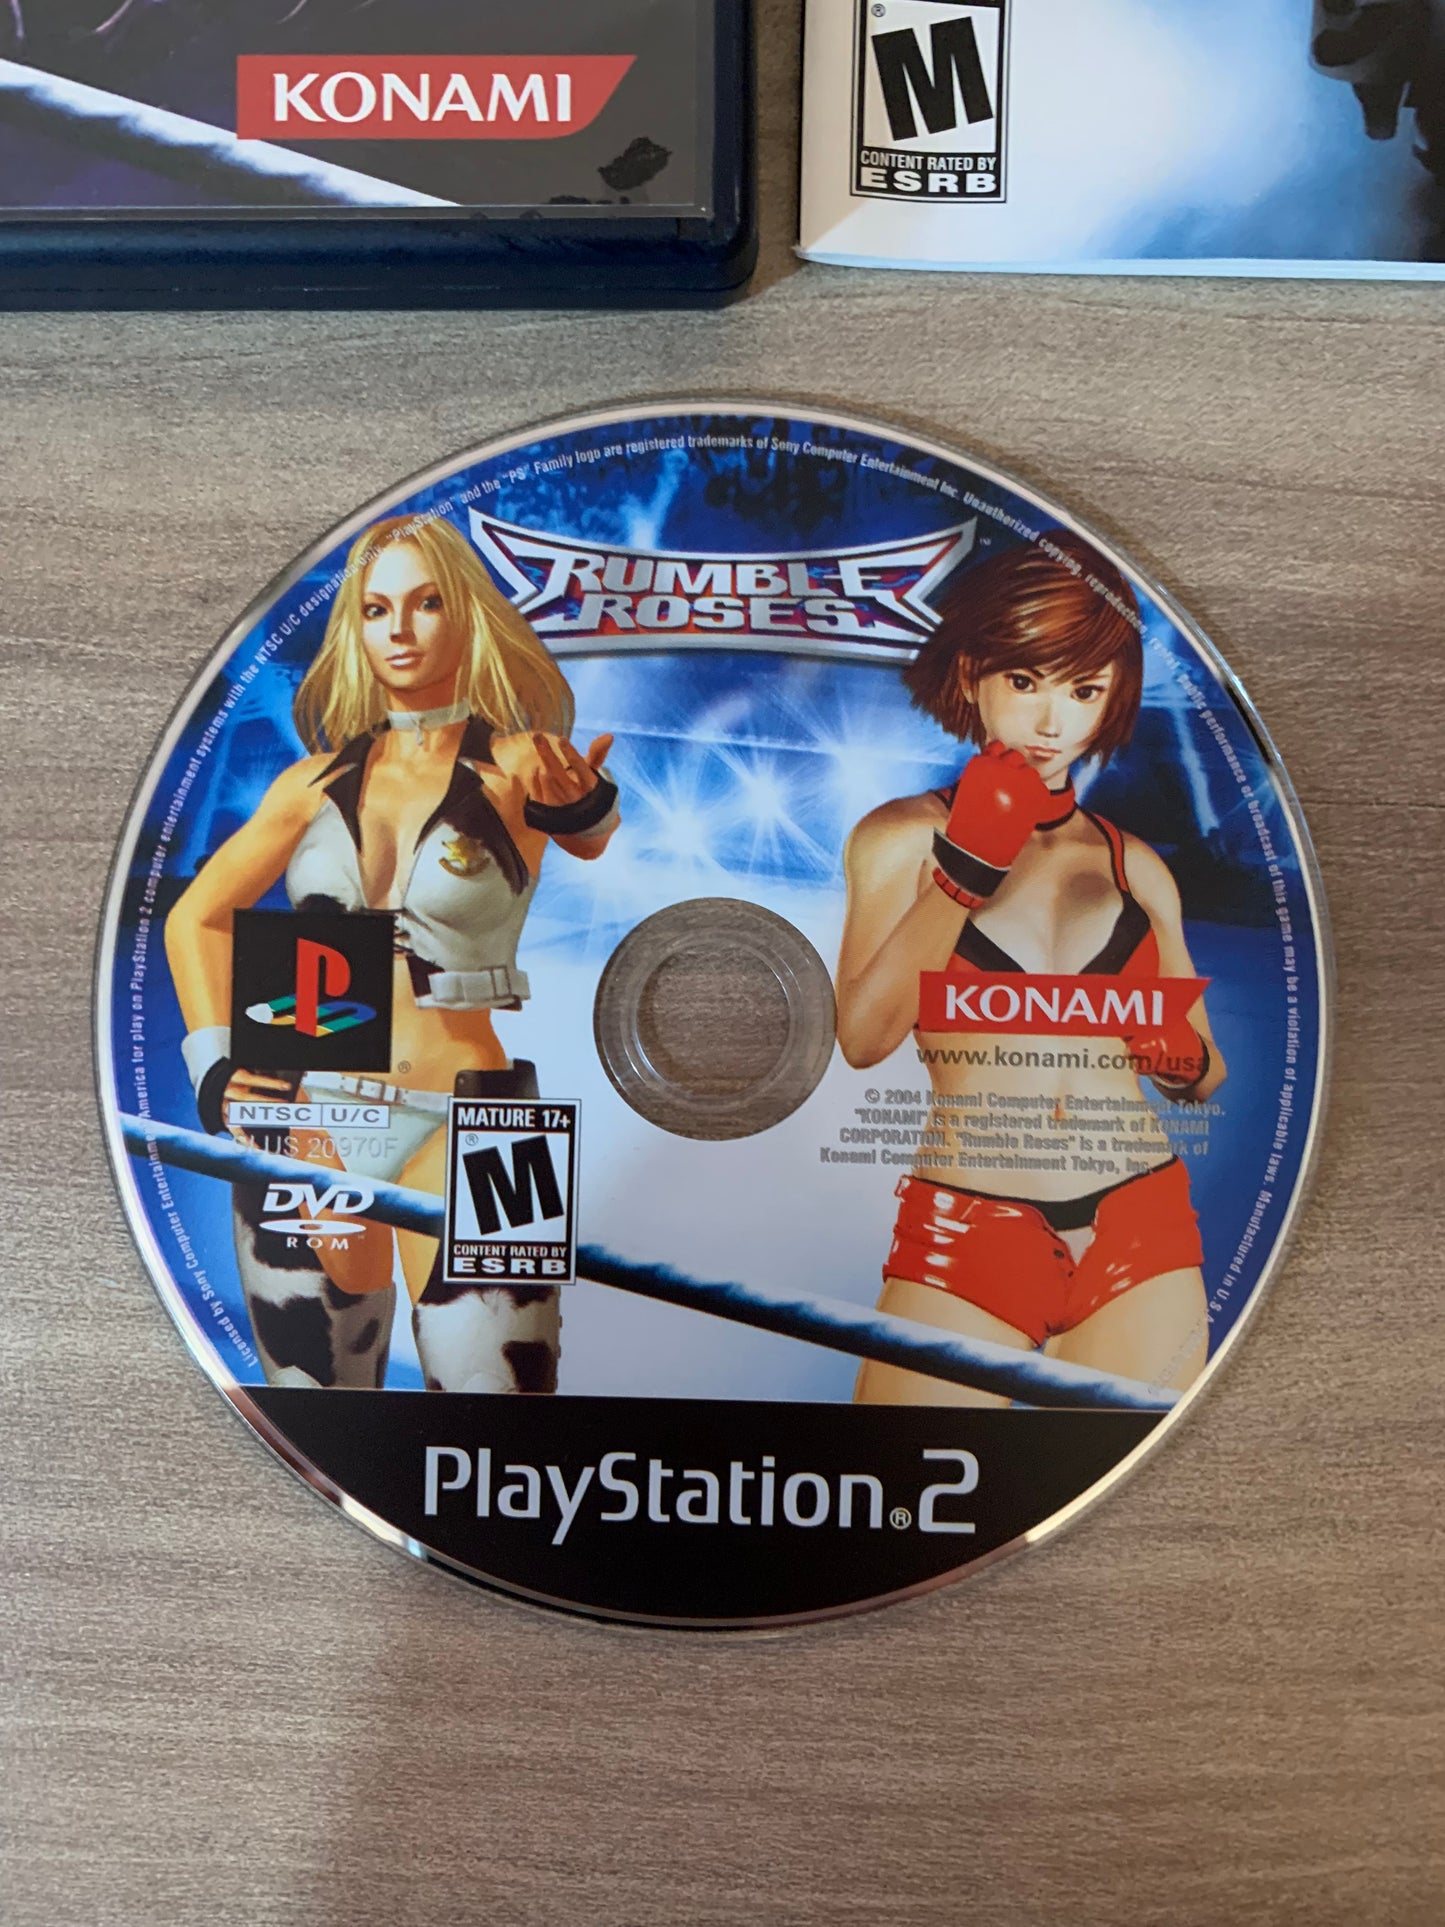 SONY PLAYSTATiON 2 [PS2] | RUMBLE ROSES